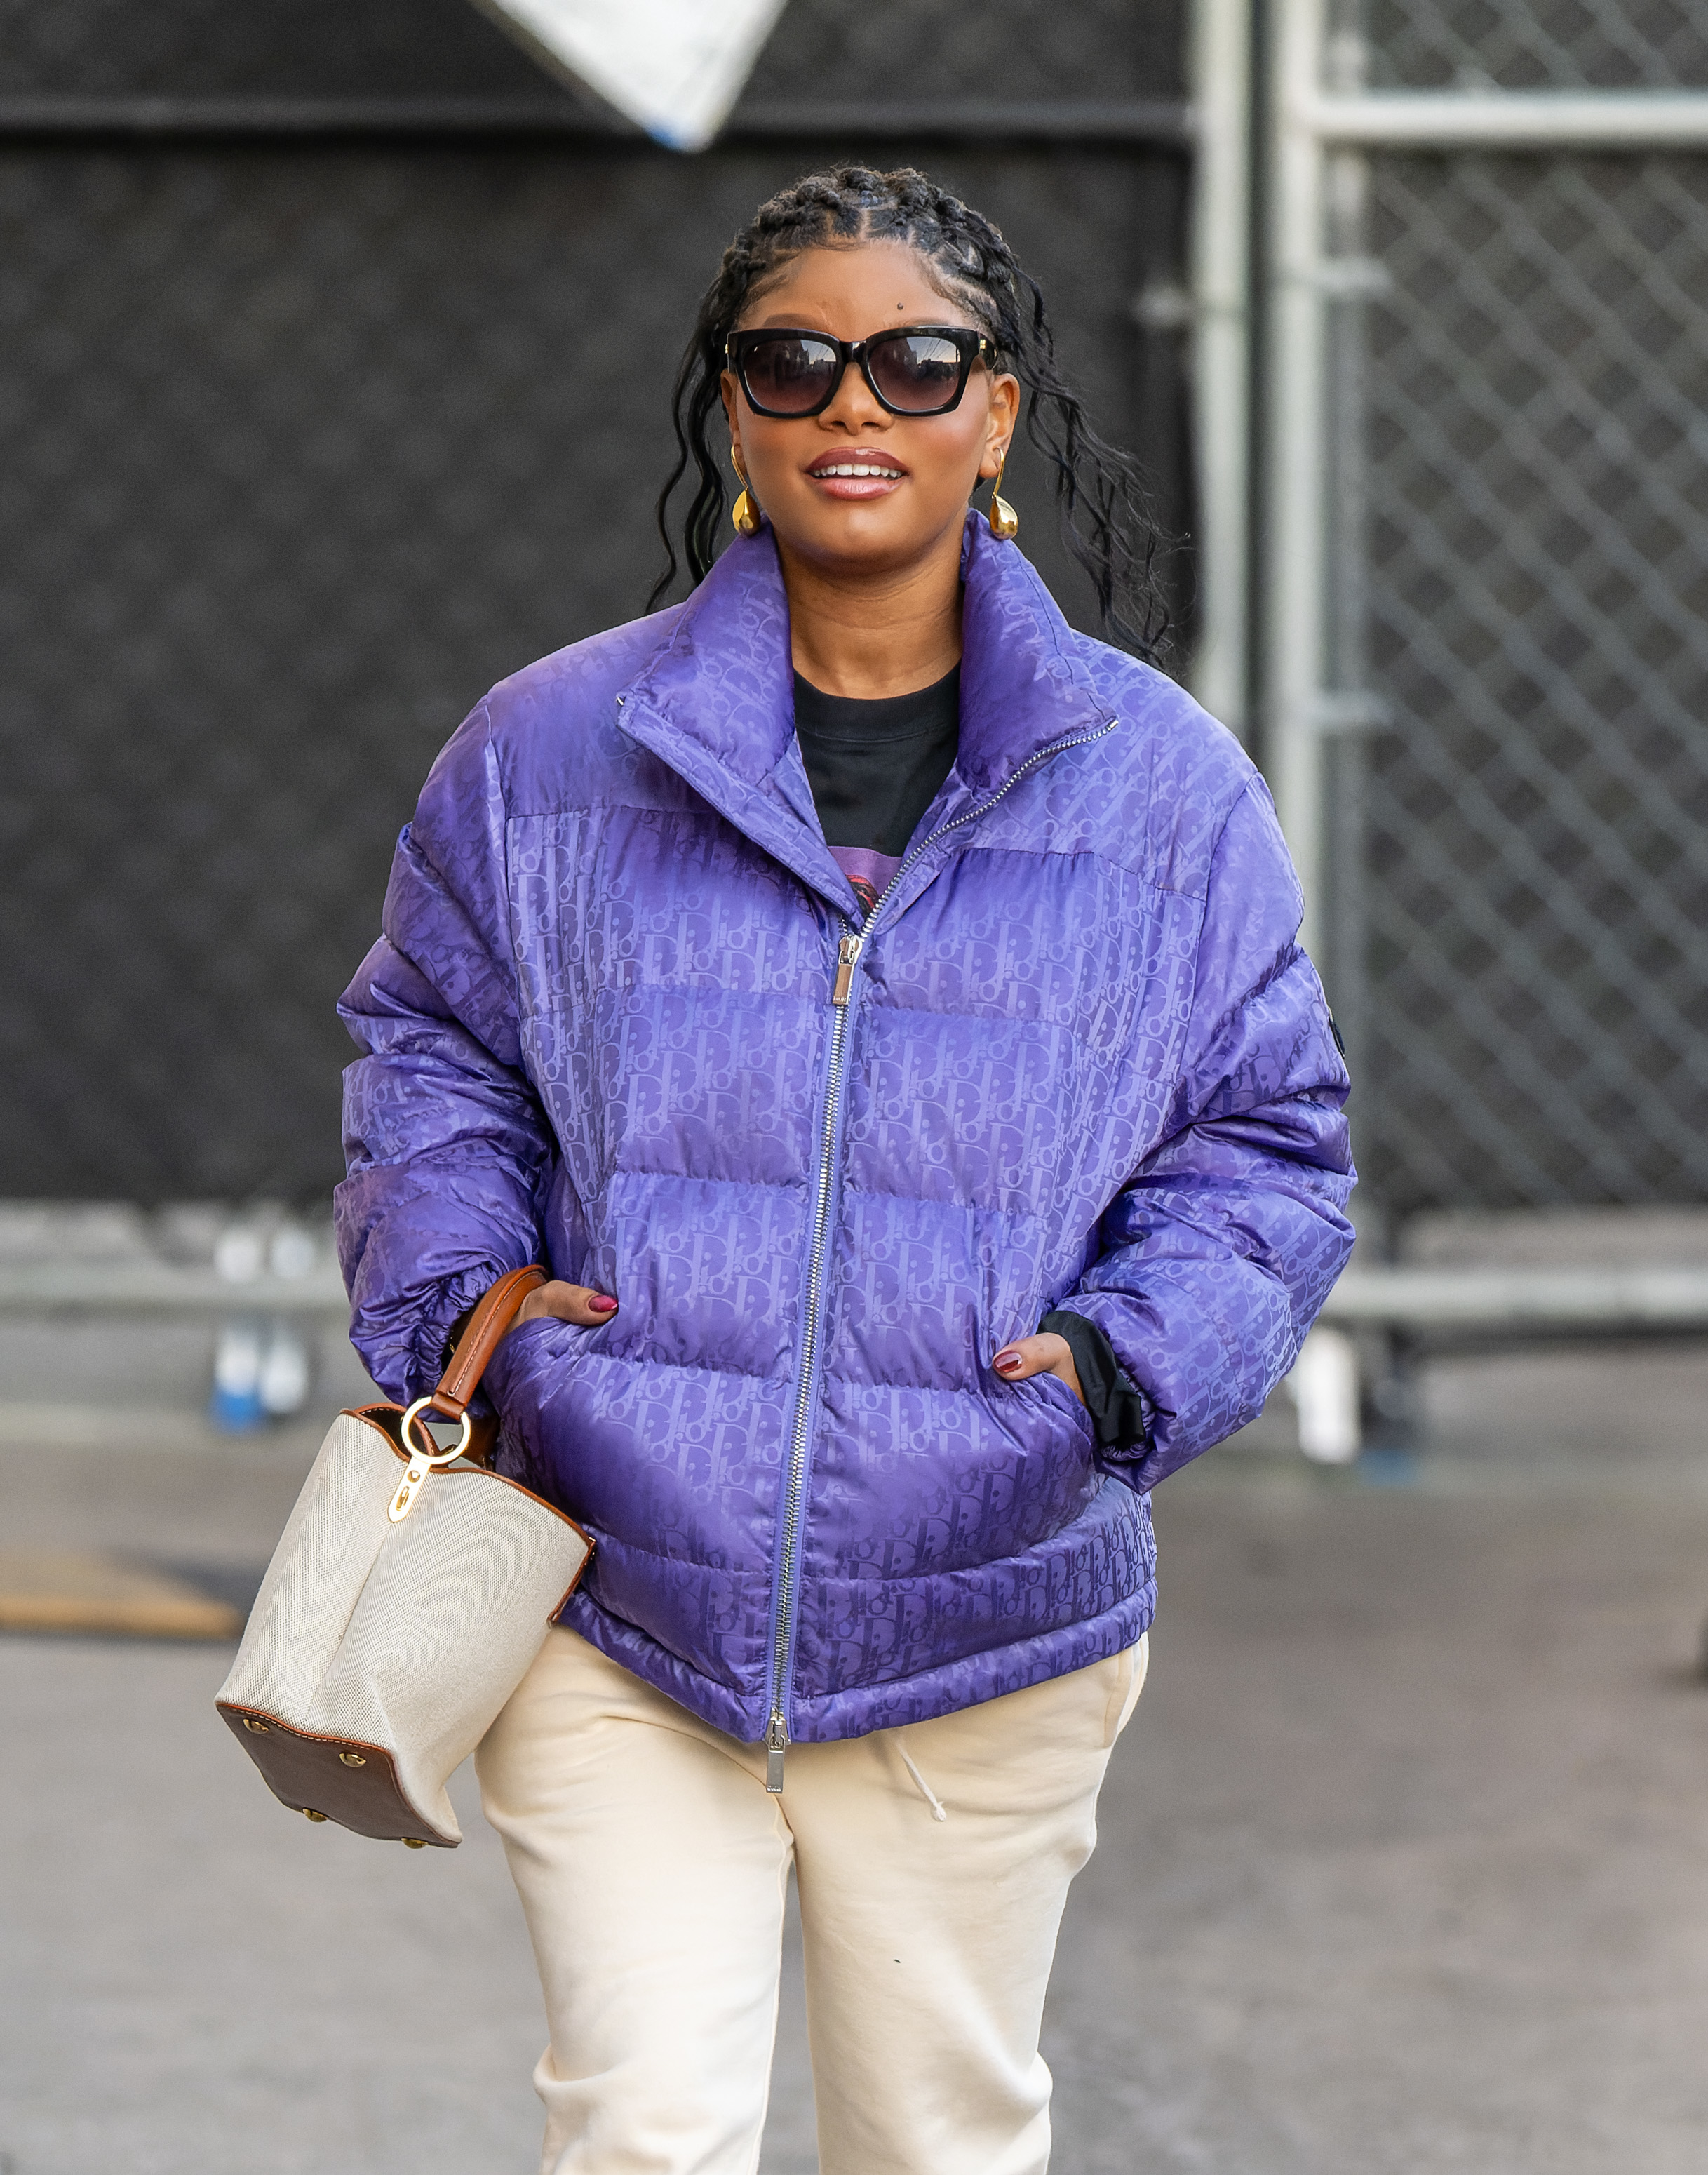 A close-up of Halle walking outside wearing a puffy zip-front jacket and pants